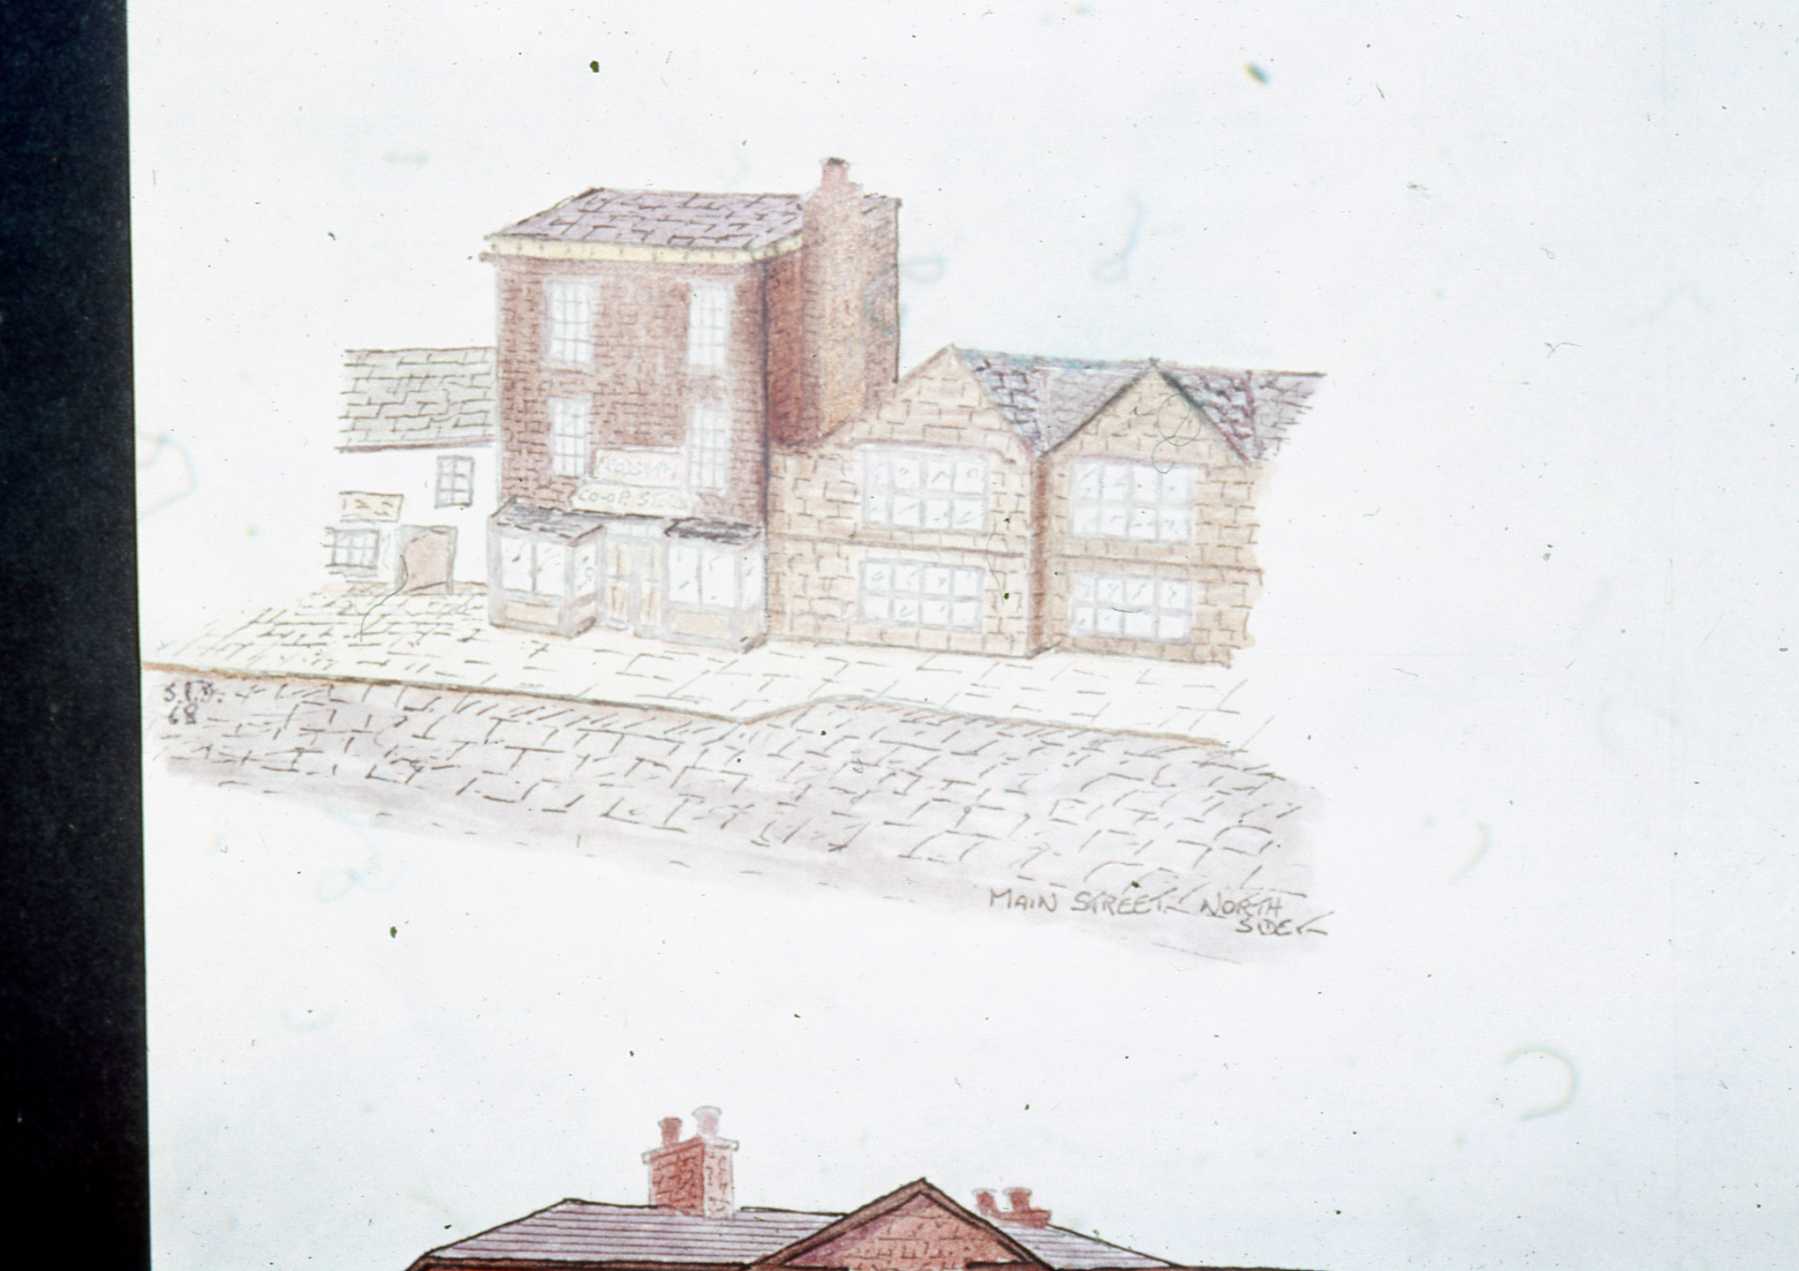 D4 021 Sketch of Bear's Paw and Frodsham Coop store.jpg